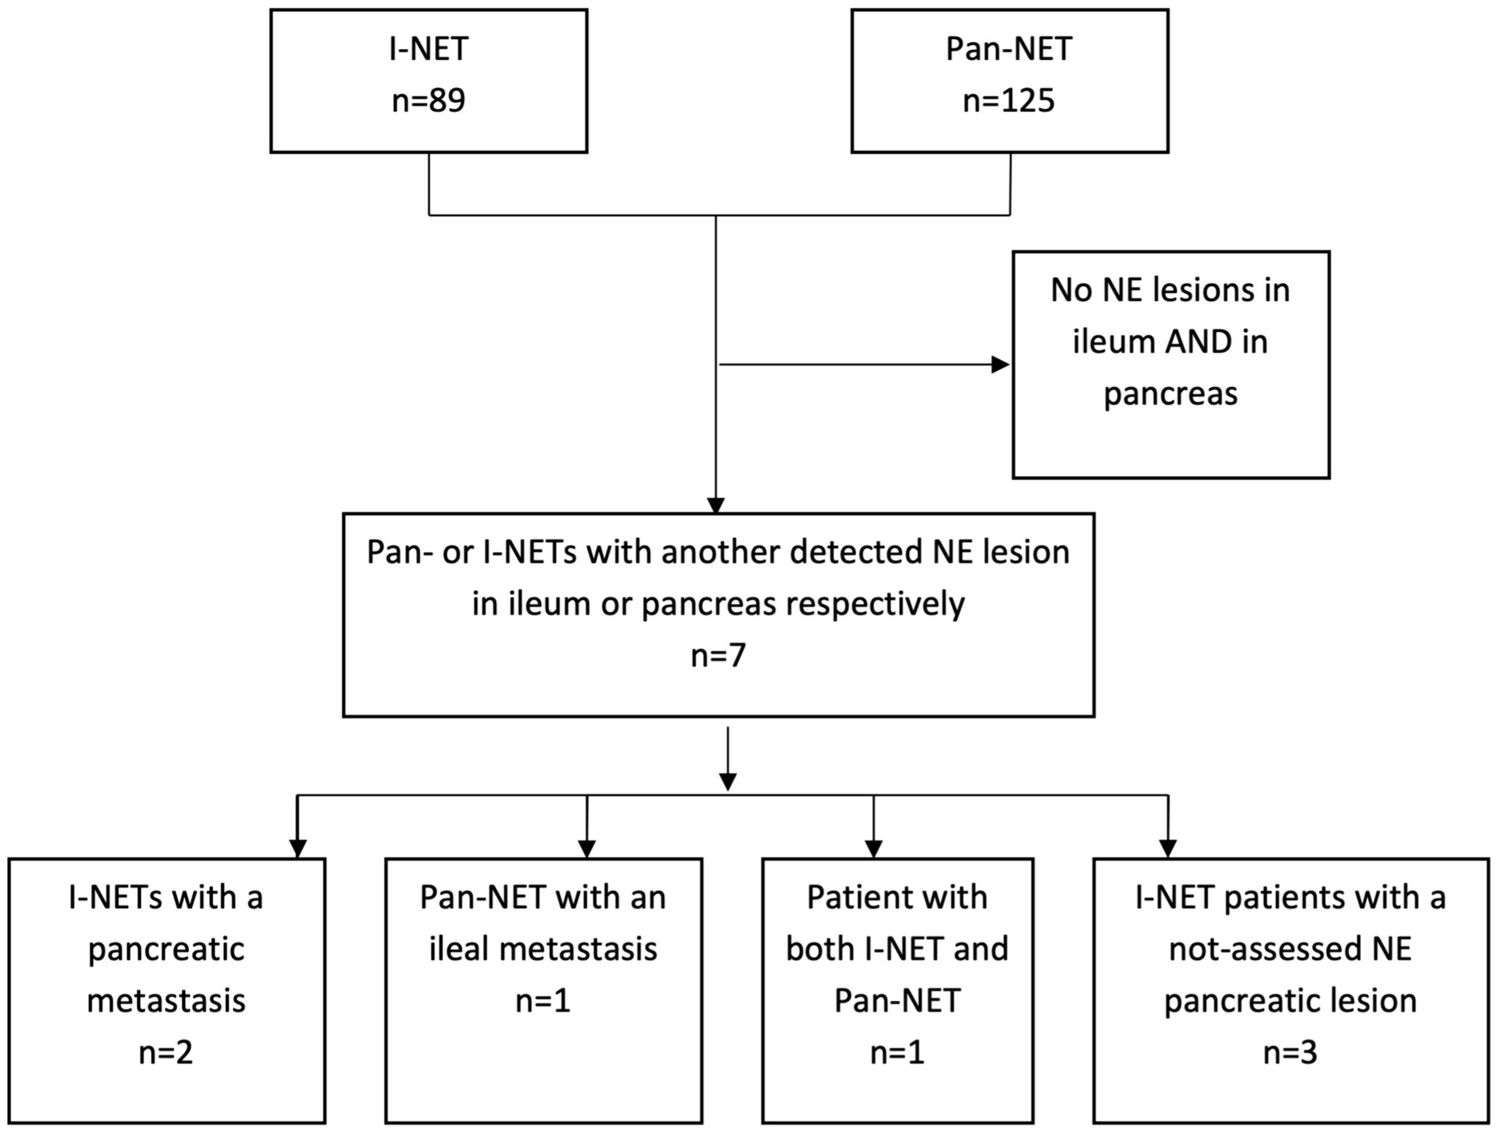 Co-existing Neuroendocrine Tumors in the Ileum and Pancreas: A Clinico-Pathological Challenge